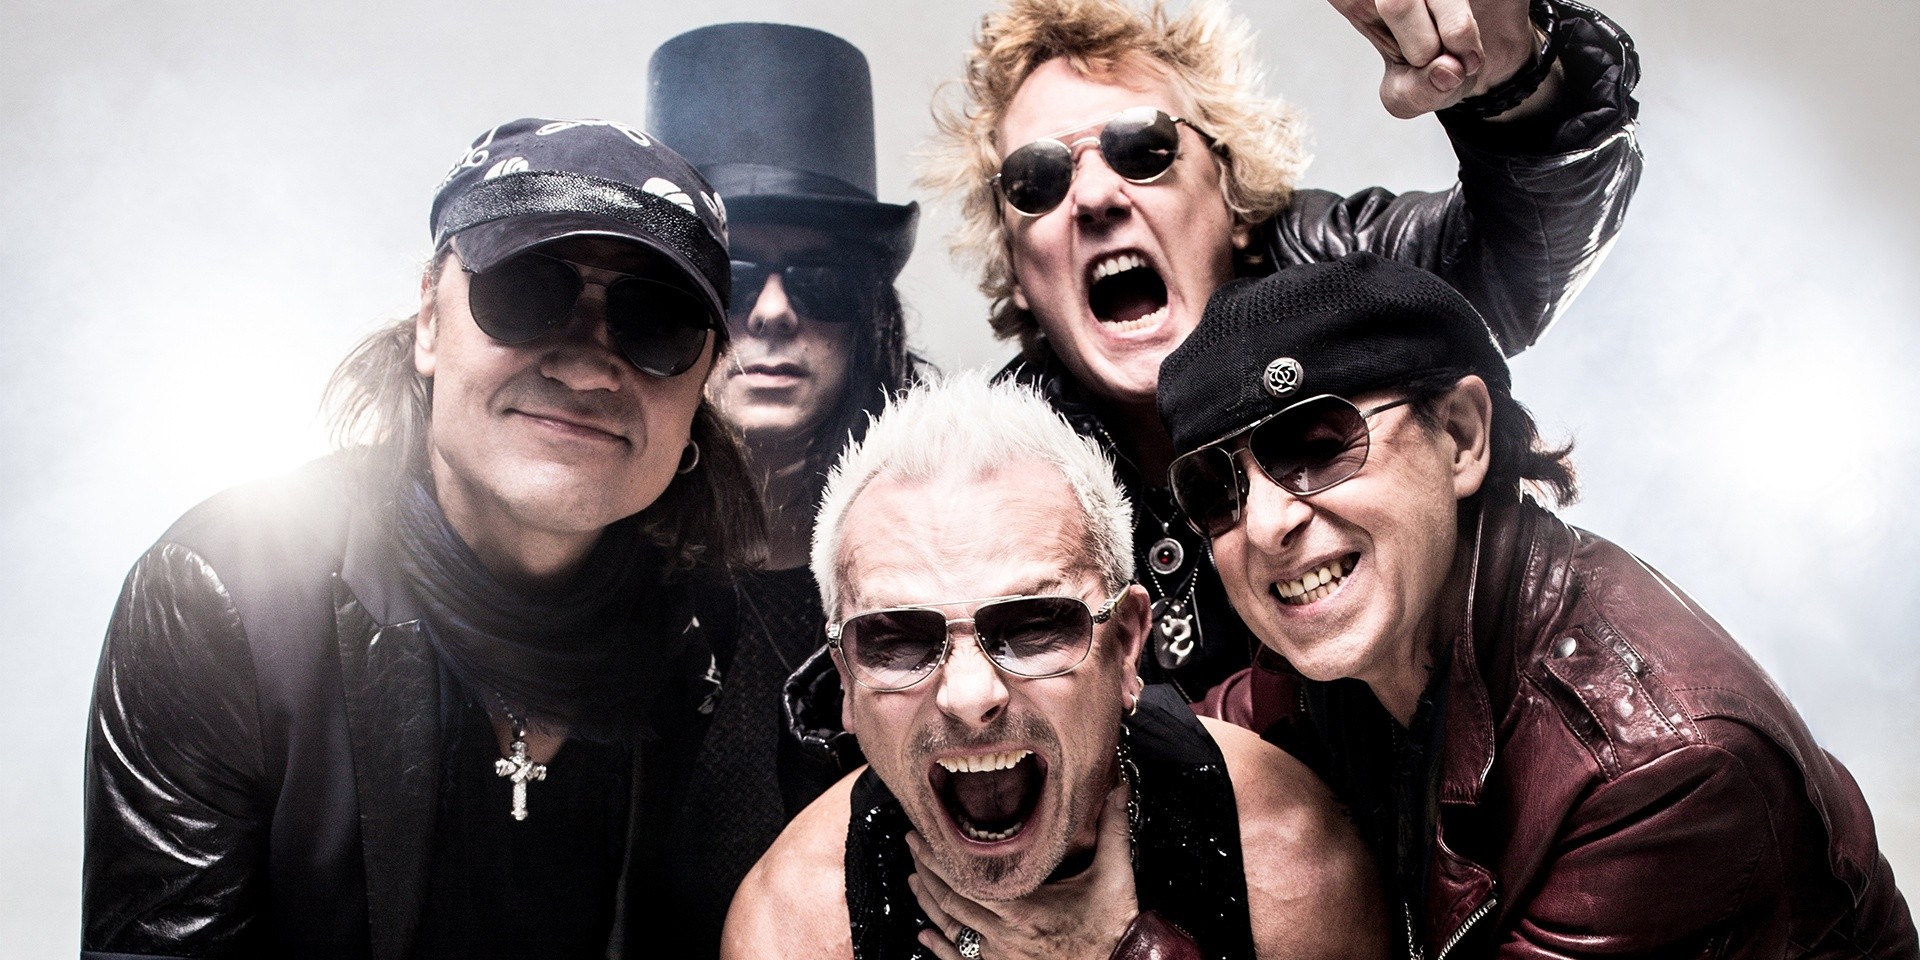 Hard rock legends Scorpions to perform in Singapore for 50th anniversary